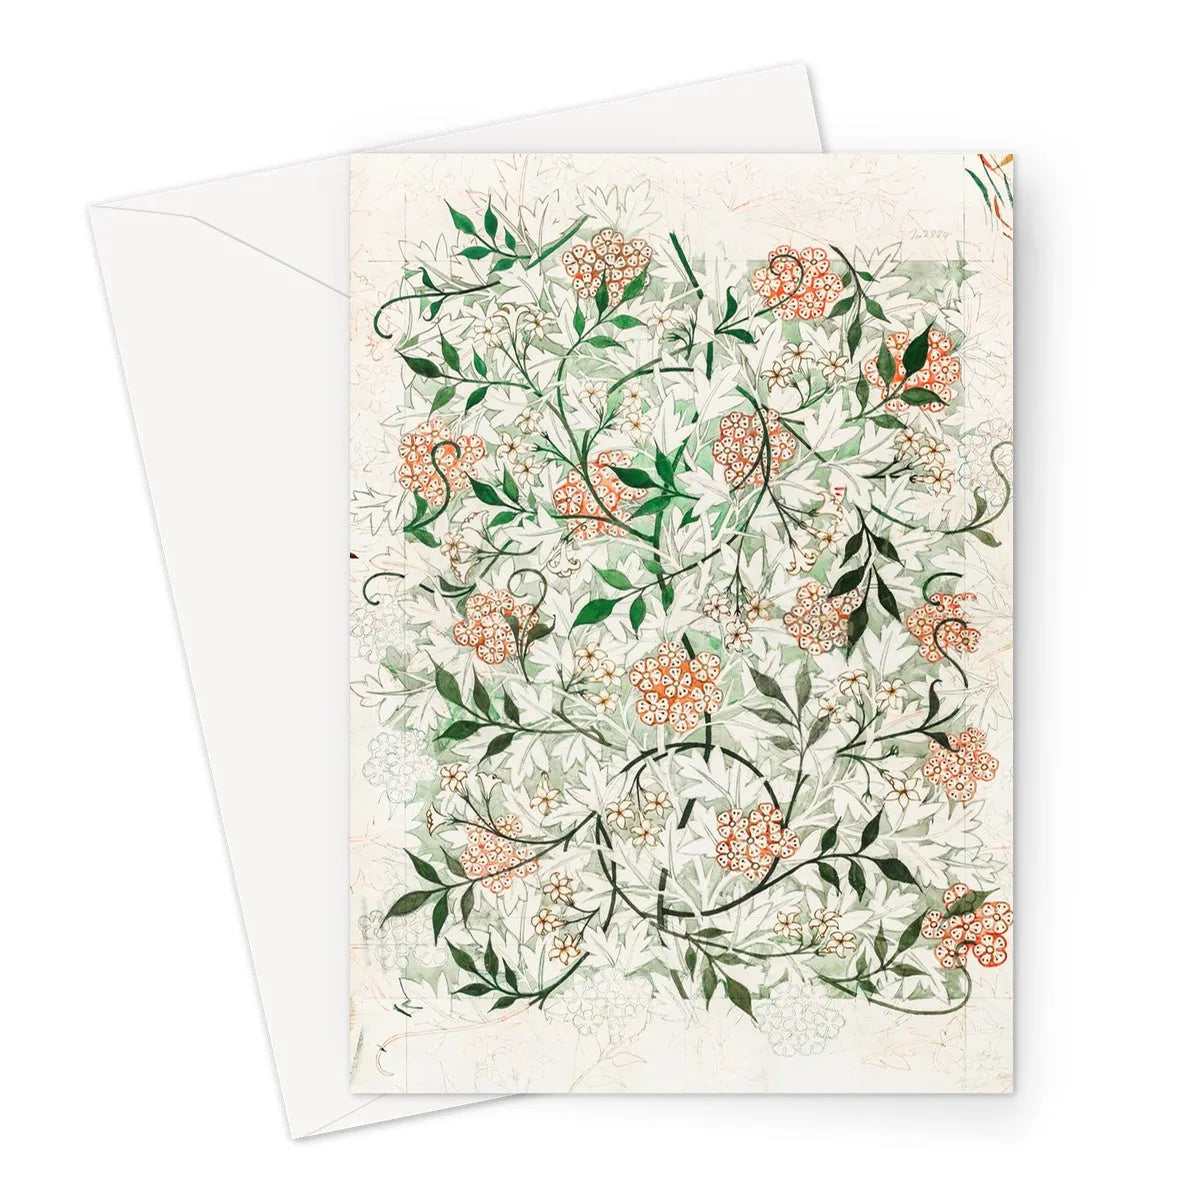 Jasmine By William Morris Greeting Card - A5 Portrait / 1 Card - Greeting & Note Cards - Aesthetic Art